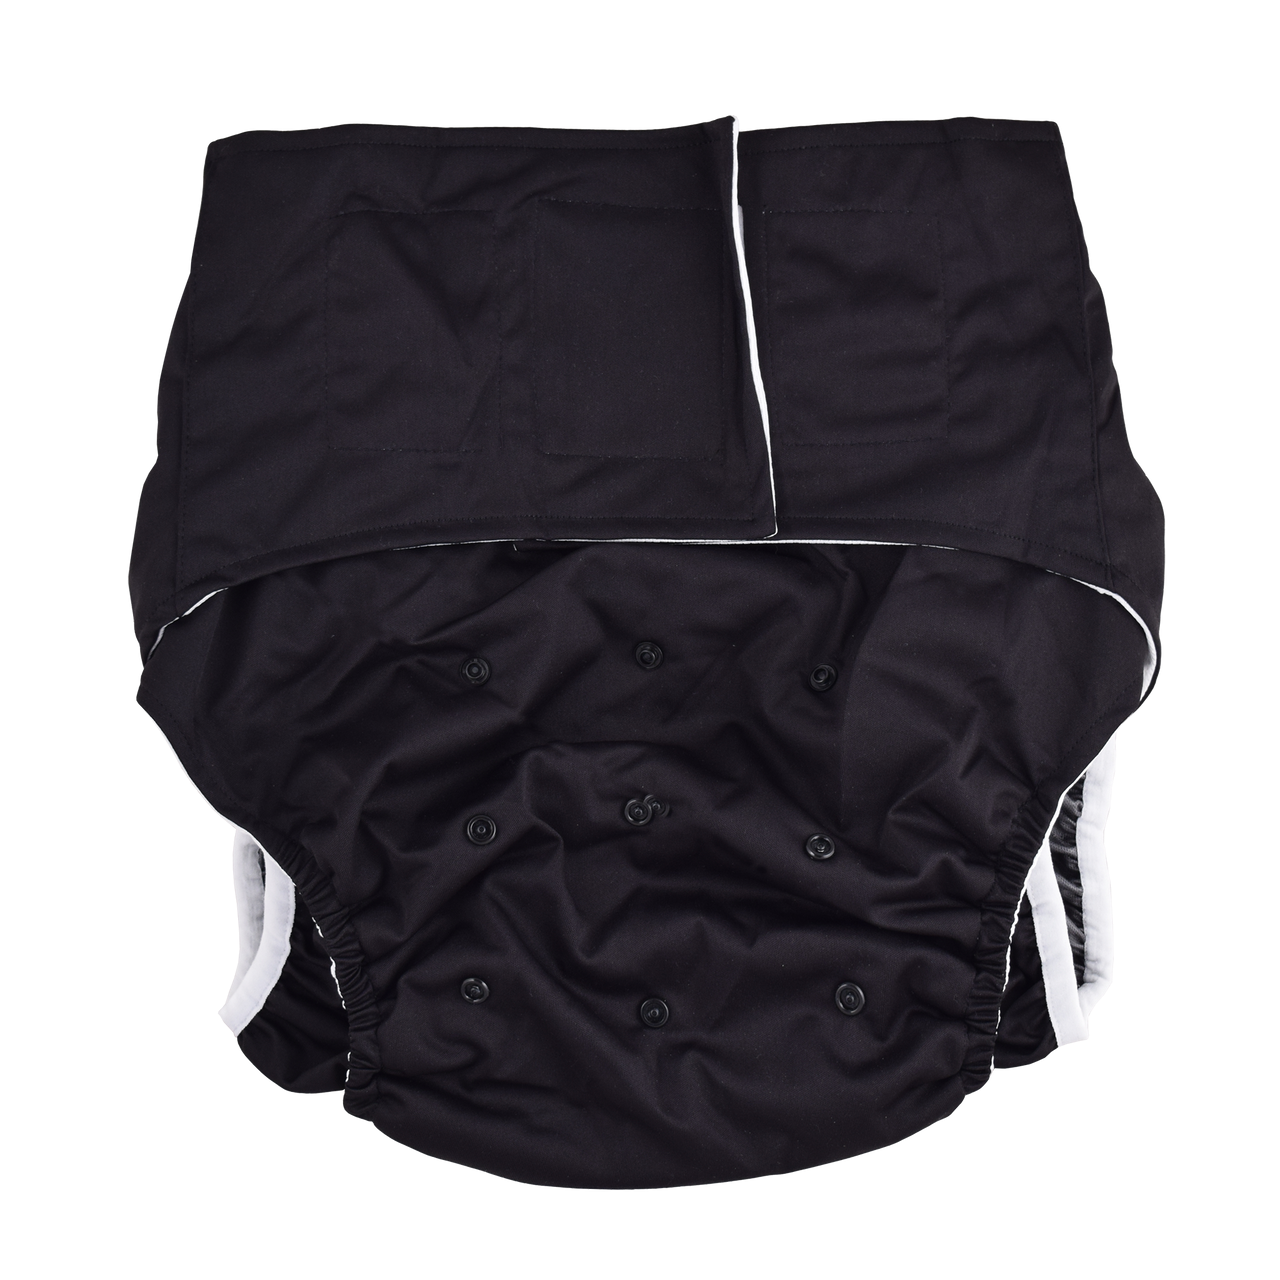 All-in-One Cloth Diapers